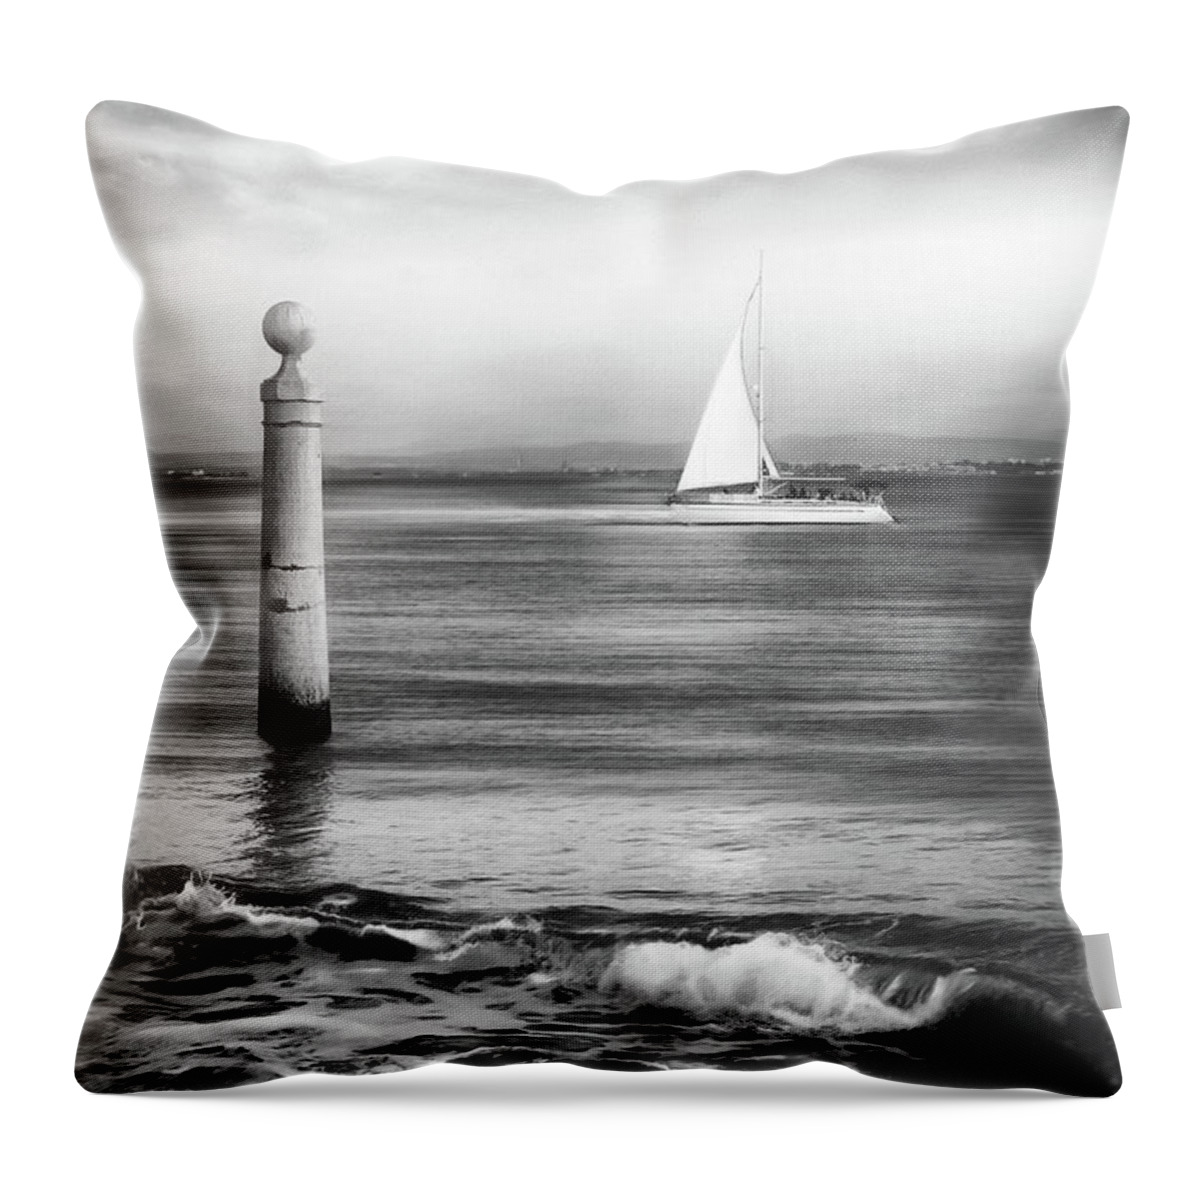 Lisbon Throw Pillow featuring the photograph A Lisbon Sunset by The Tagus River Black and White by Carol Japp